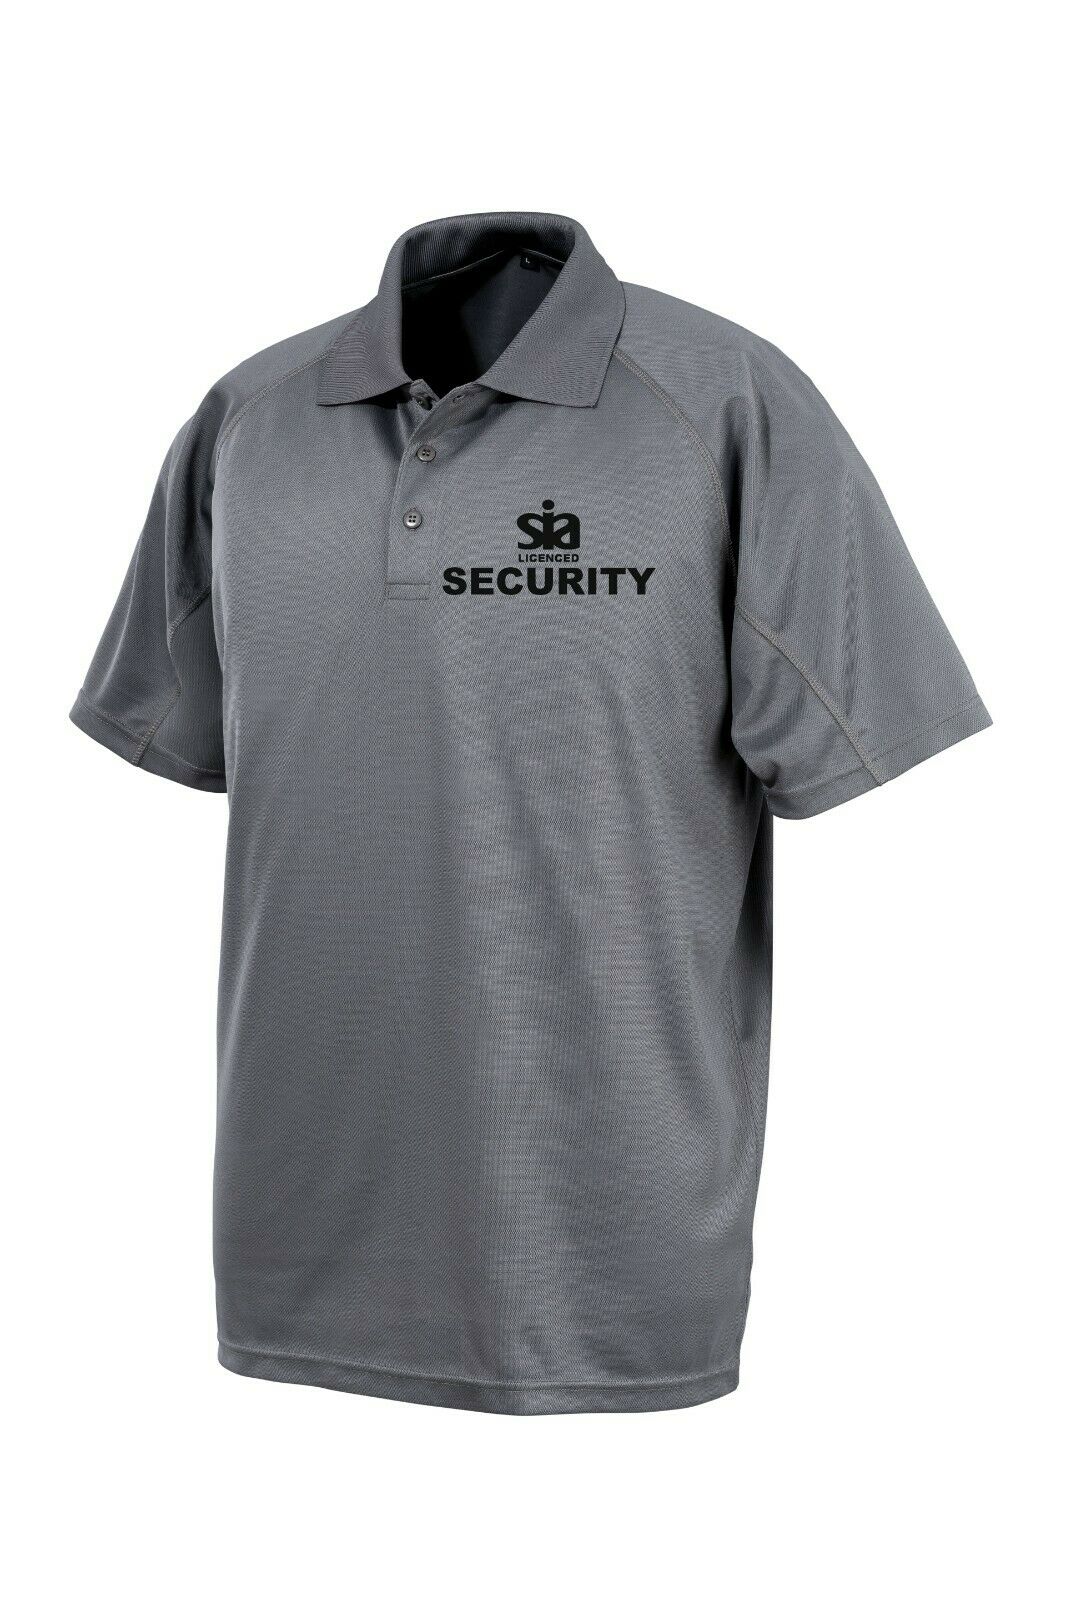 Performance Polo w/ moisture wicking technology SECURITY Polo REFLECTIVE design 